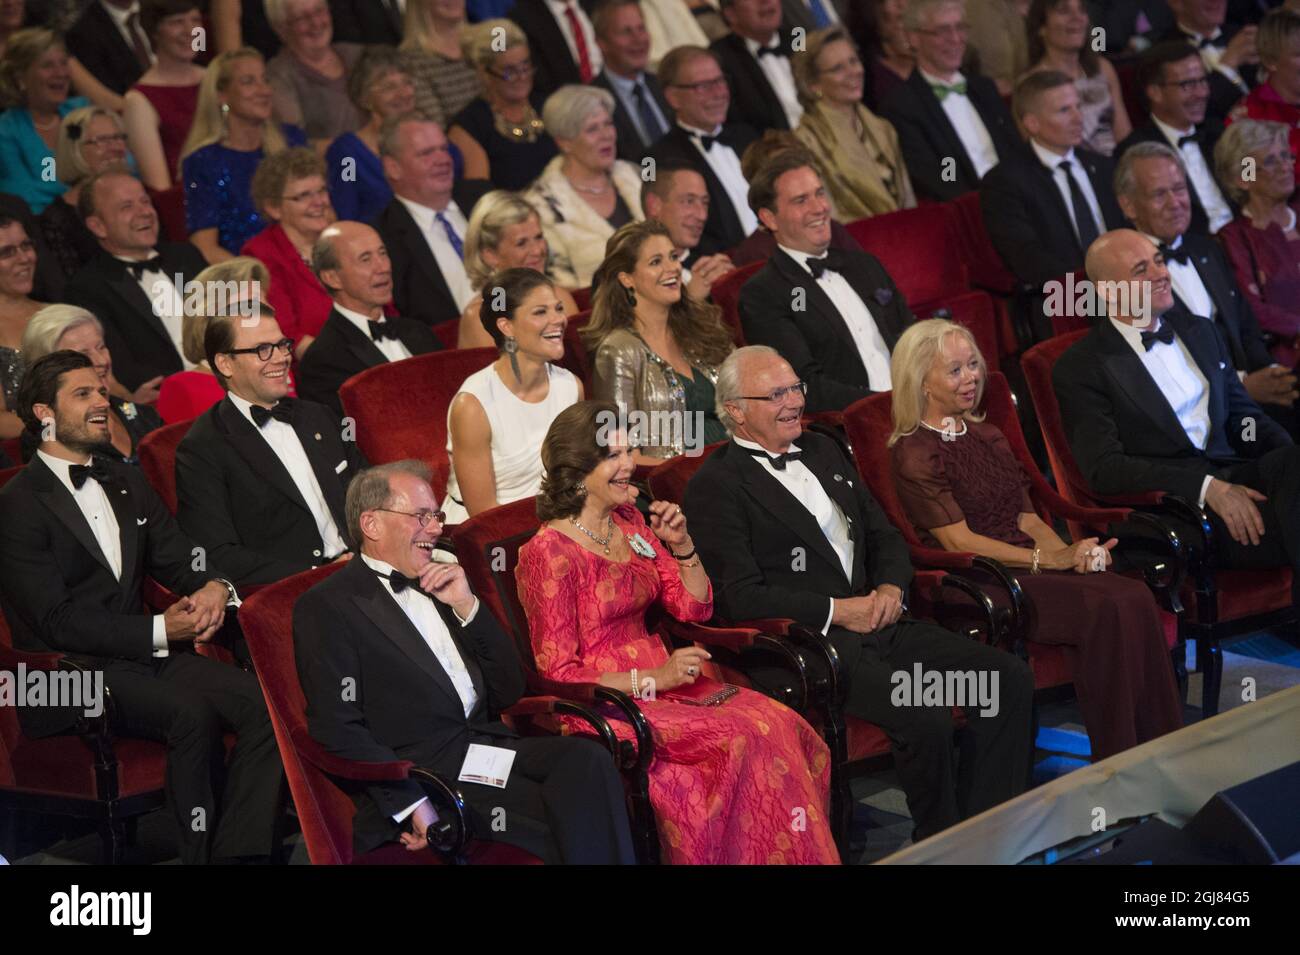 STOCKHOLM 20130914 Prince Carl Philip, Prince Daniel, Crown Princess Victoria, Princess Madeleine, Mr Christopher O'Neill and in front of them Queen Silvia and King Carl Gustaf between Per Westerberg, the speaker of the PArliament and his wife Ylwa Westerberg at the Swedish Riksdag's jubilee concert in connection with The King's 40th jubilee, held at the Concert Hall in Stockholm September 14, 2013. Photo: Fredrik Sandberg / SCANPIX / Kod 10080  Stock Photo